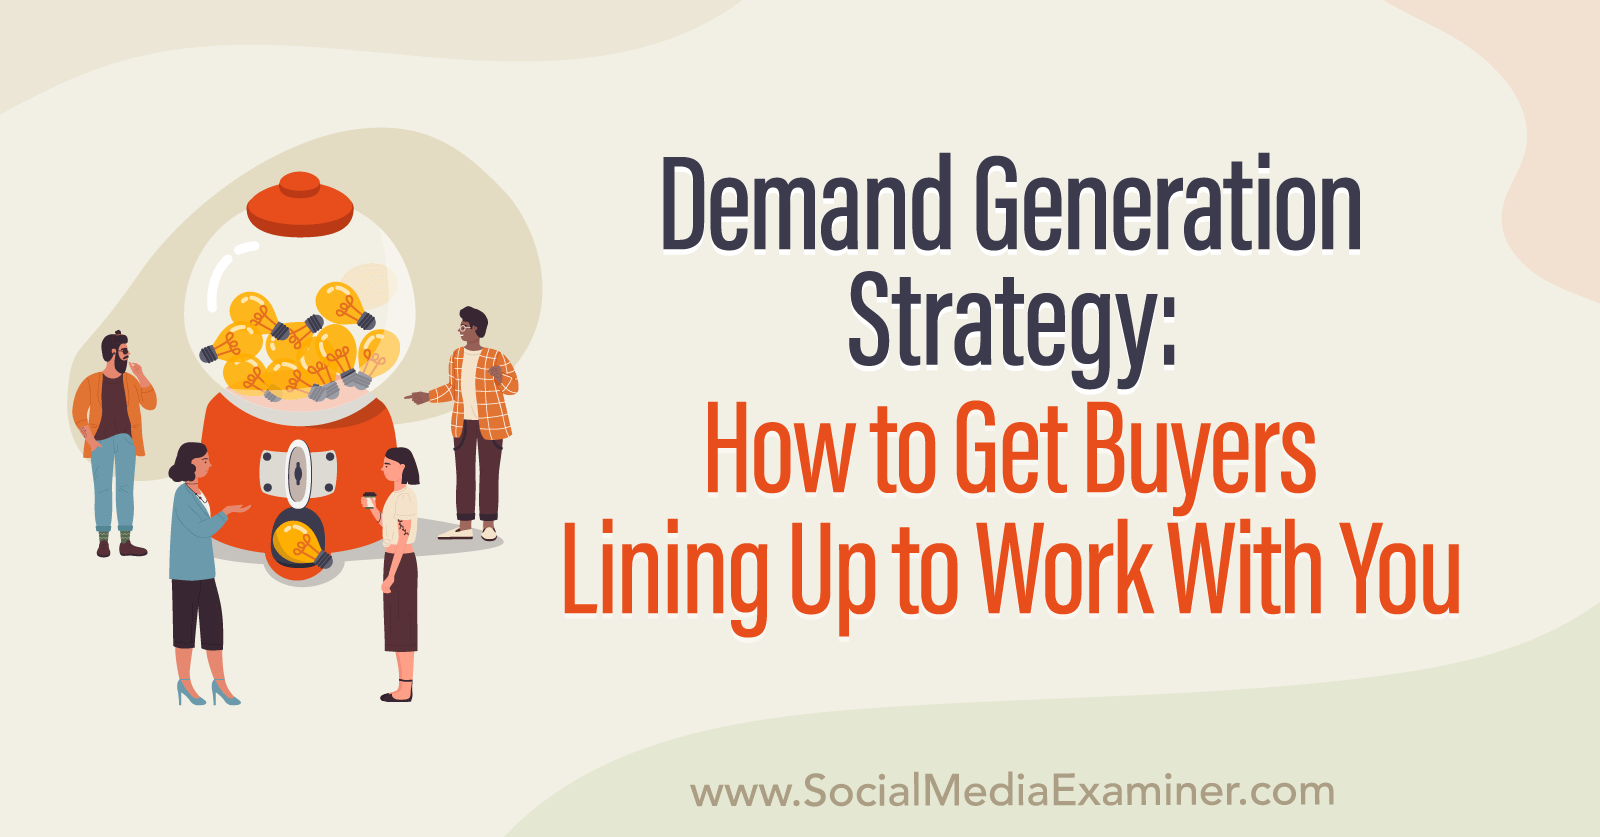 Demand Generation Strategy: How to Get Buyers to Line Up to Work With You by Social Media Examiner